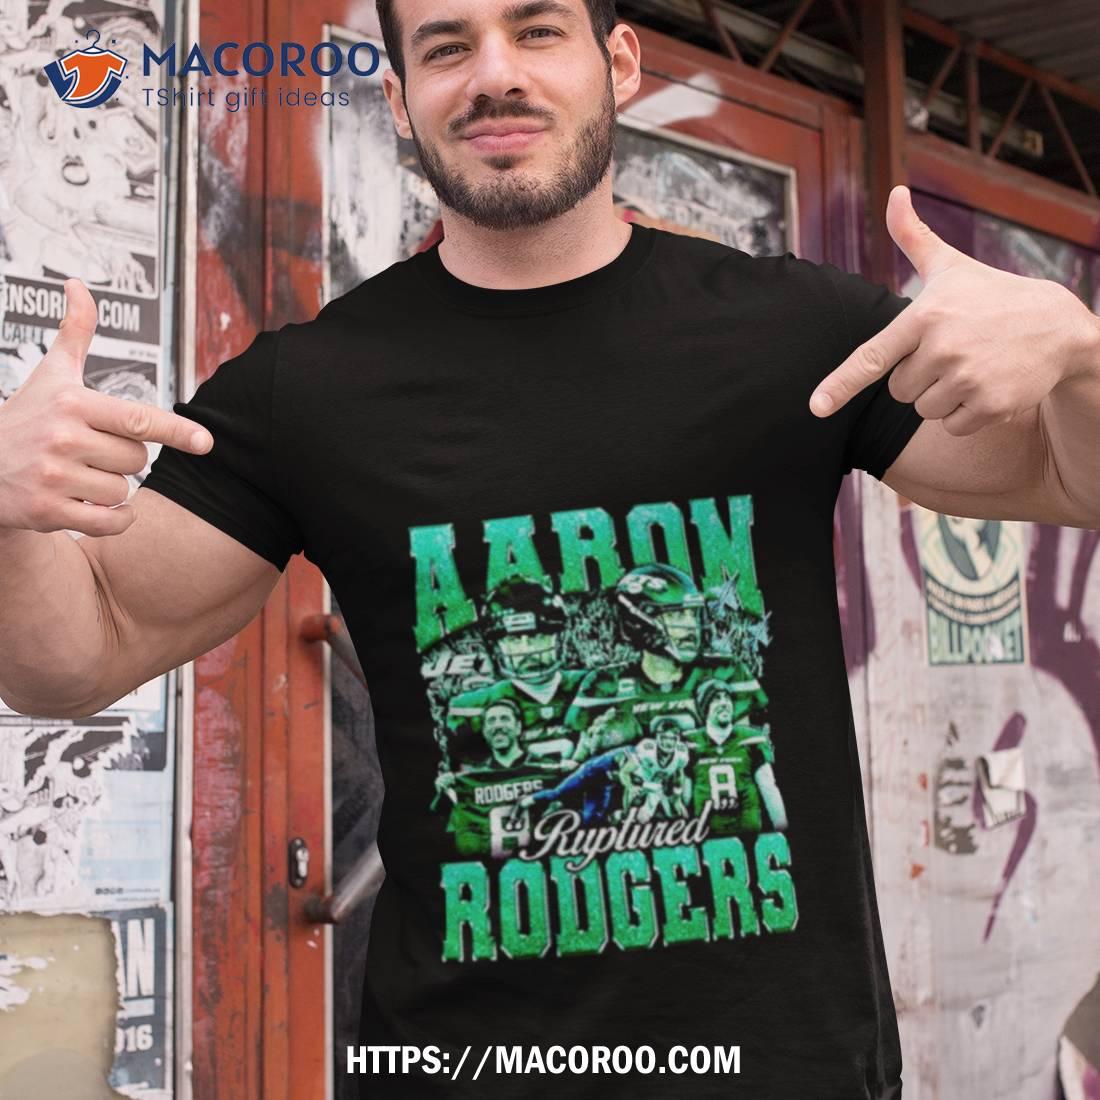 Aaron Rodgers Jerseys, Jets Jersey, Aaron Rodgers Shirts,, 60% OFF